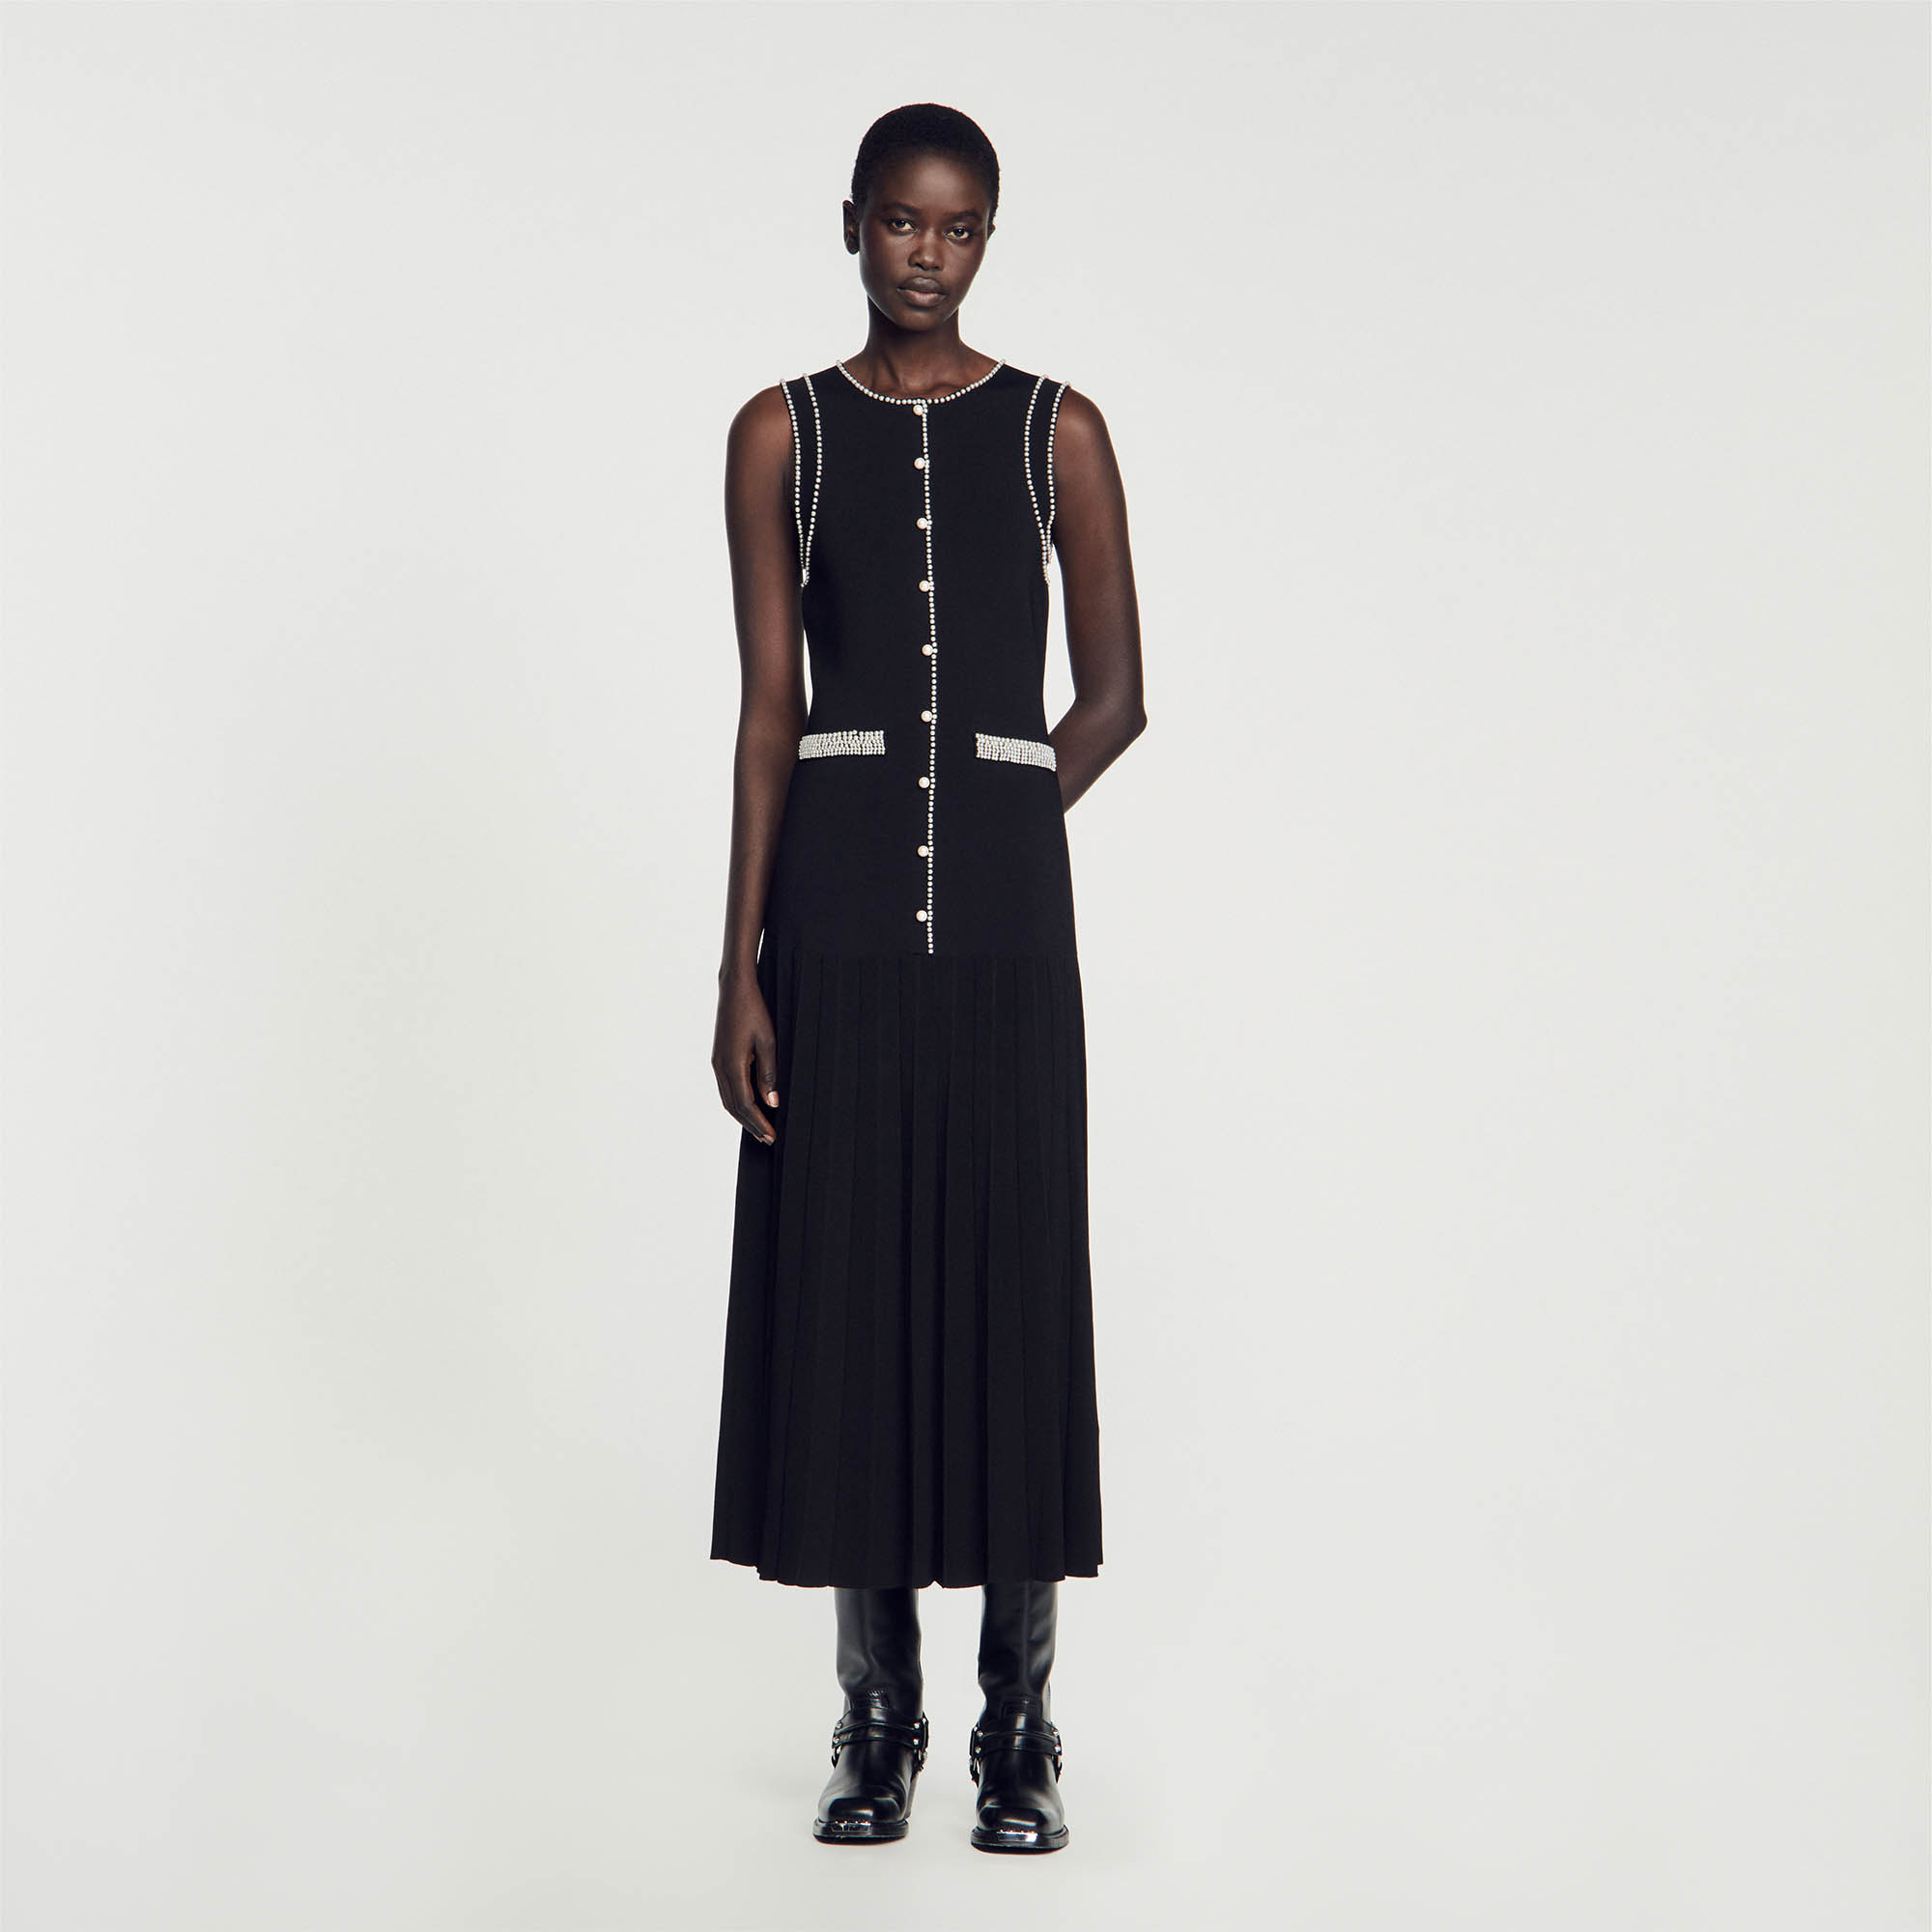 Sandro viscose Sleeveless knit midi dress with a round neck, beaded button fastening and decorative flared bottom